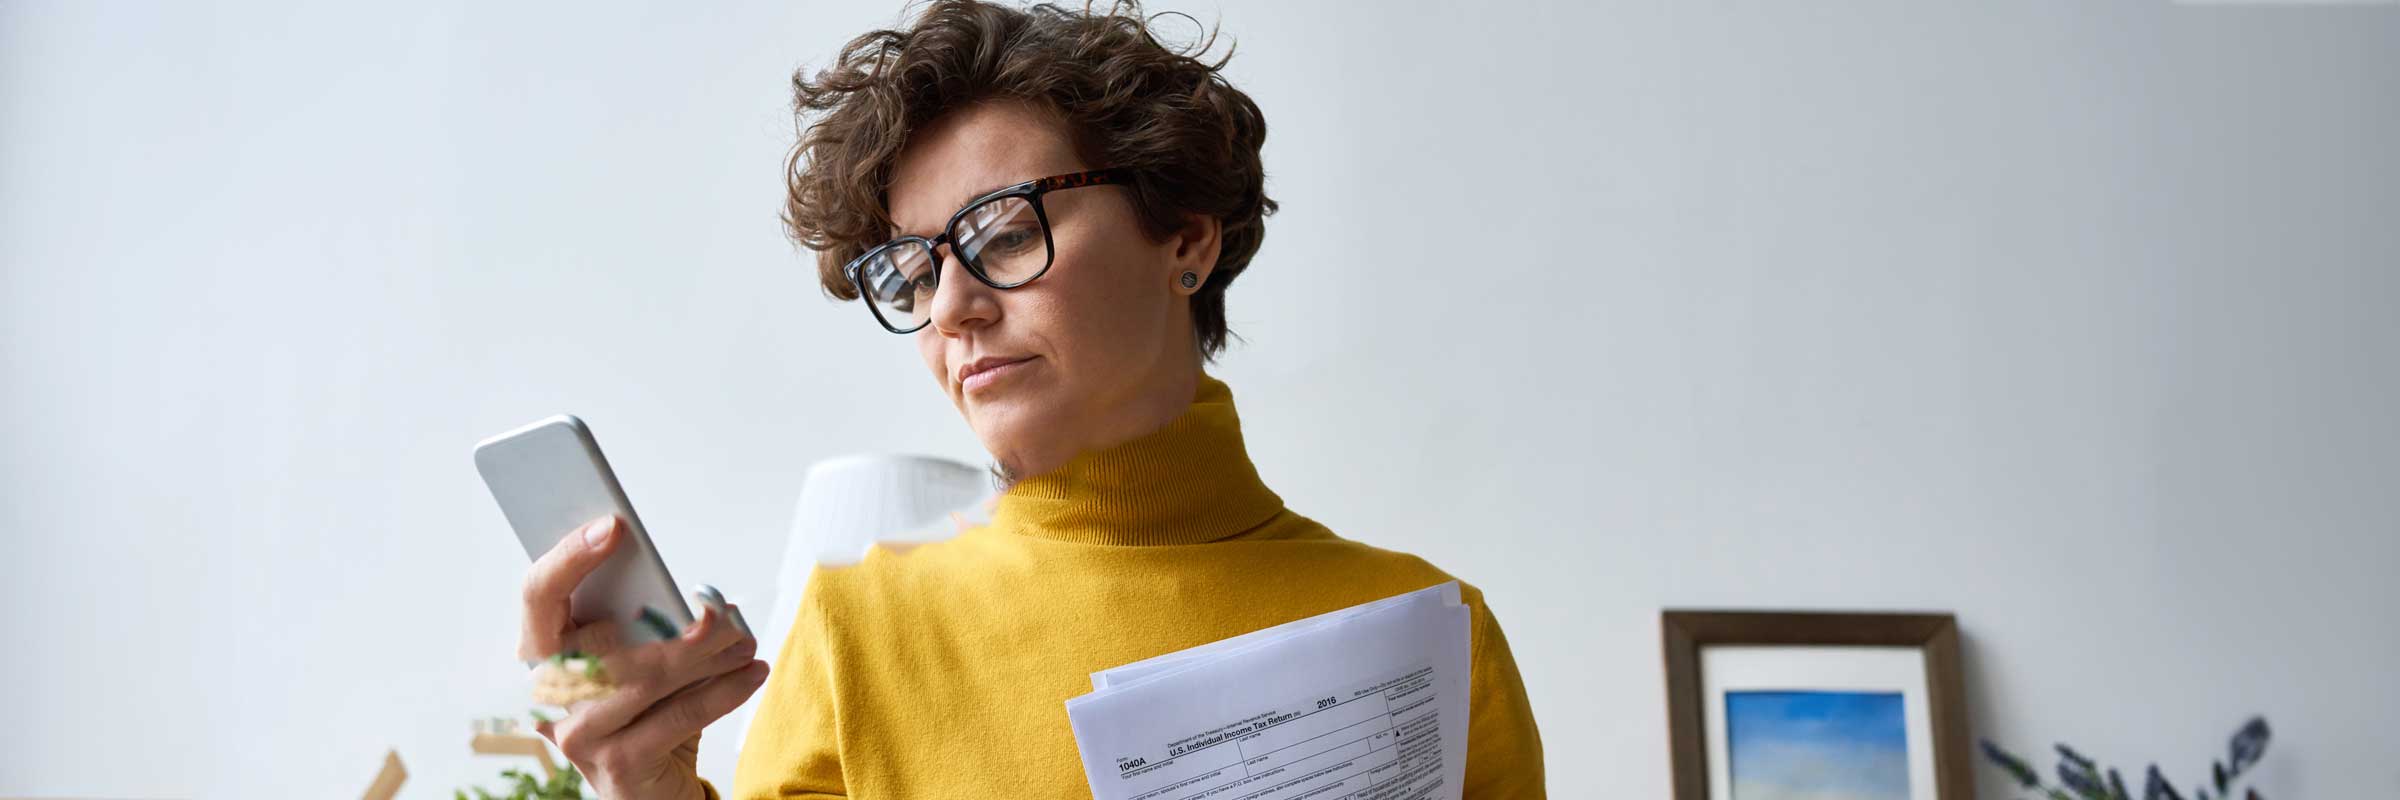 Woman looking at her phone while holding tax forms.